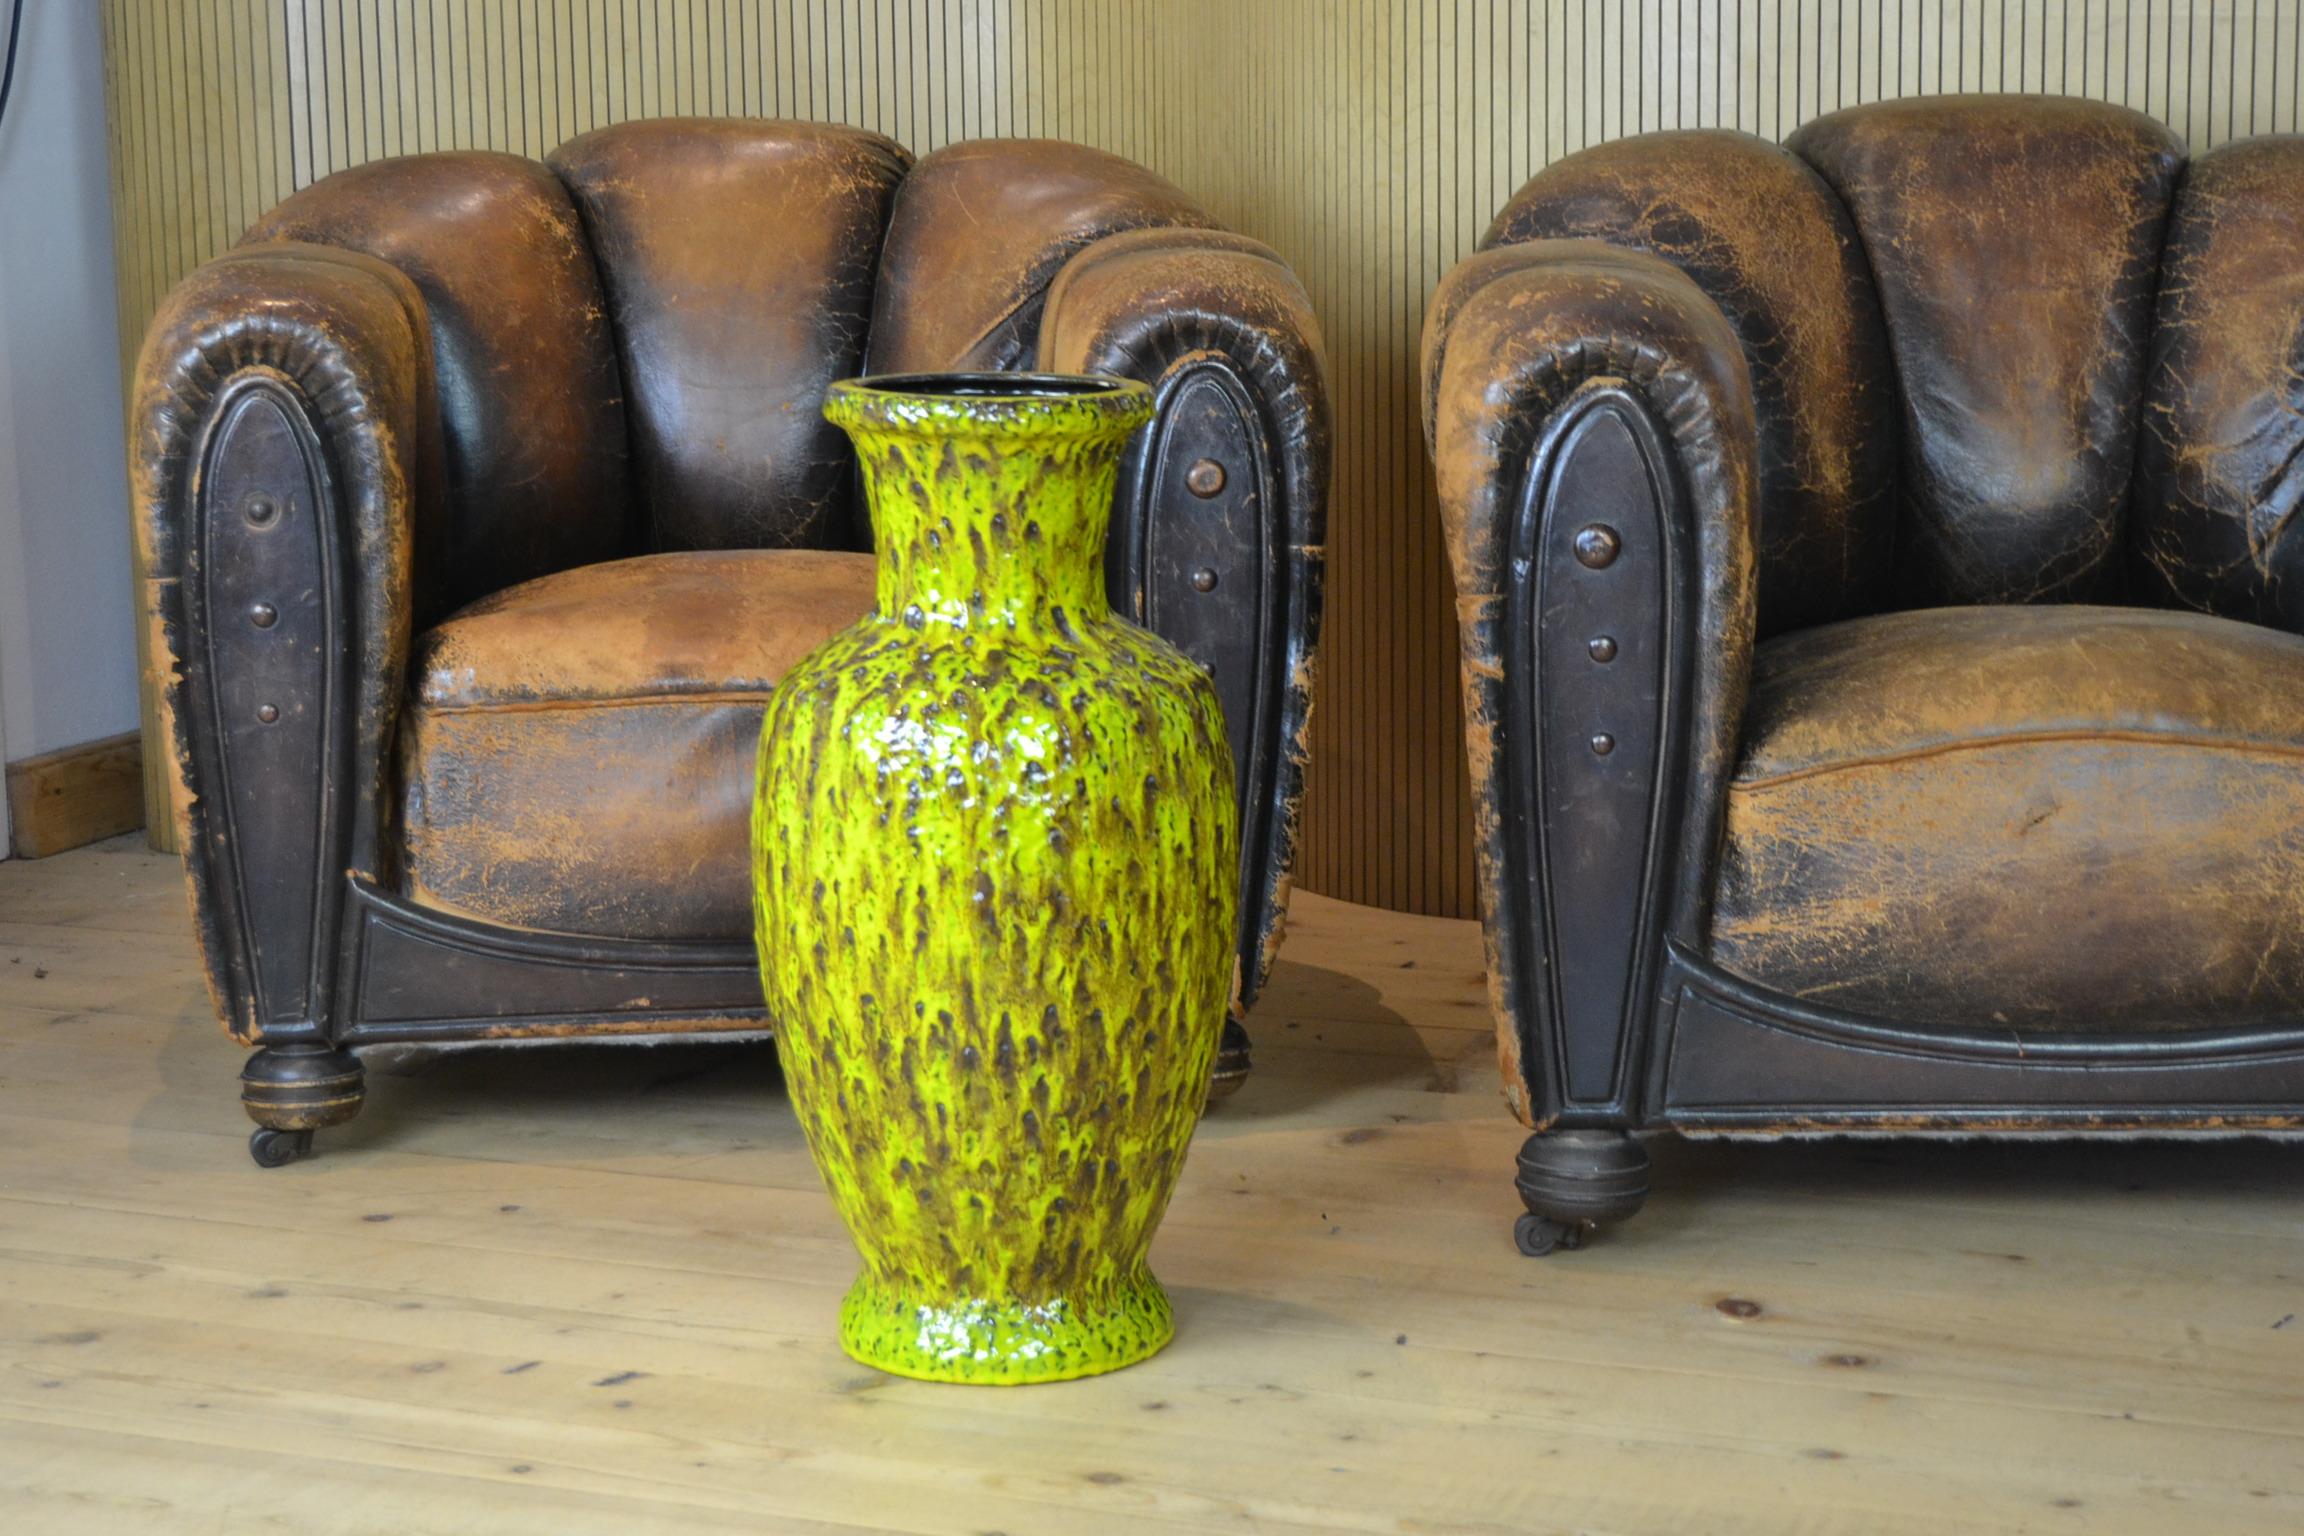 Large Vintage Fat Lava Ceramic Pottery Vase , Floorvase , Vessel 
made by Bay Keramik Western Germany. 
Numbered 571 - 60. 

This large Vase - Floorvase - Art Vase dates from the 1960s 
and has the colors yellow- green - brown. 
It's an eye